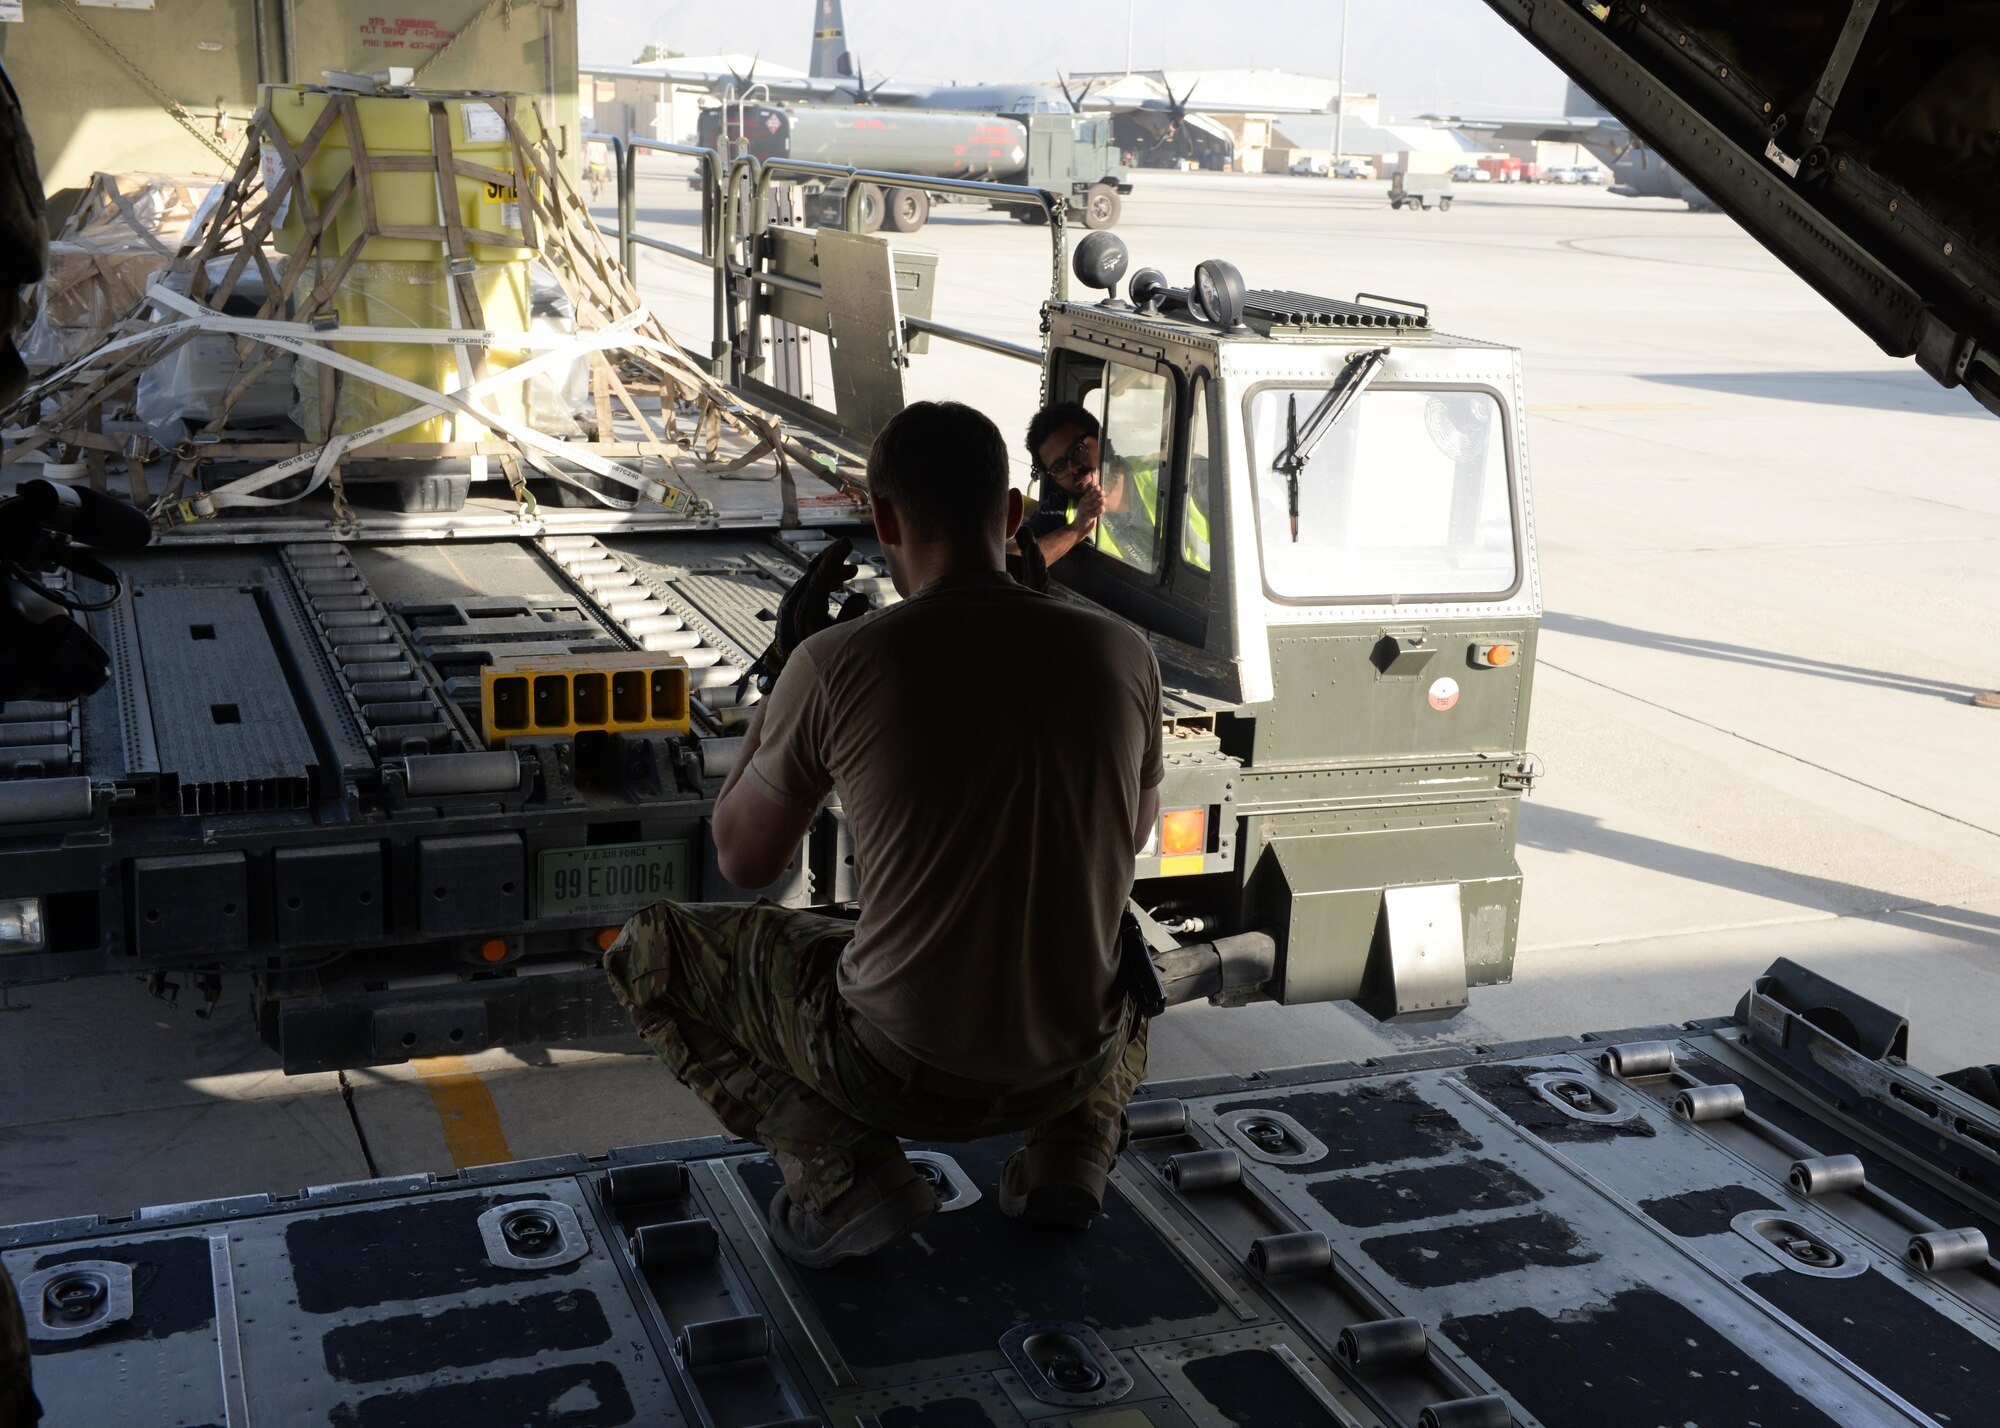 U.S. Air Force Staff Sgt. Casey Strauss, 774th Expeditionary Airlift Squadron C-130J Super Hercules loadmaster, directs a truck as its moves cargo onto the aircraft Aug. 28, 2015, at Bagram Airfield, Afghanistan. Strauss and his fellow loadmasters are responsible for loading and unloading cargo, passenger safety in flight, and ensuring the aircraft stays within the proper weight and balance limitations. (U.S. Air Force photo by Senior Airman Cierra Presentado/Released)